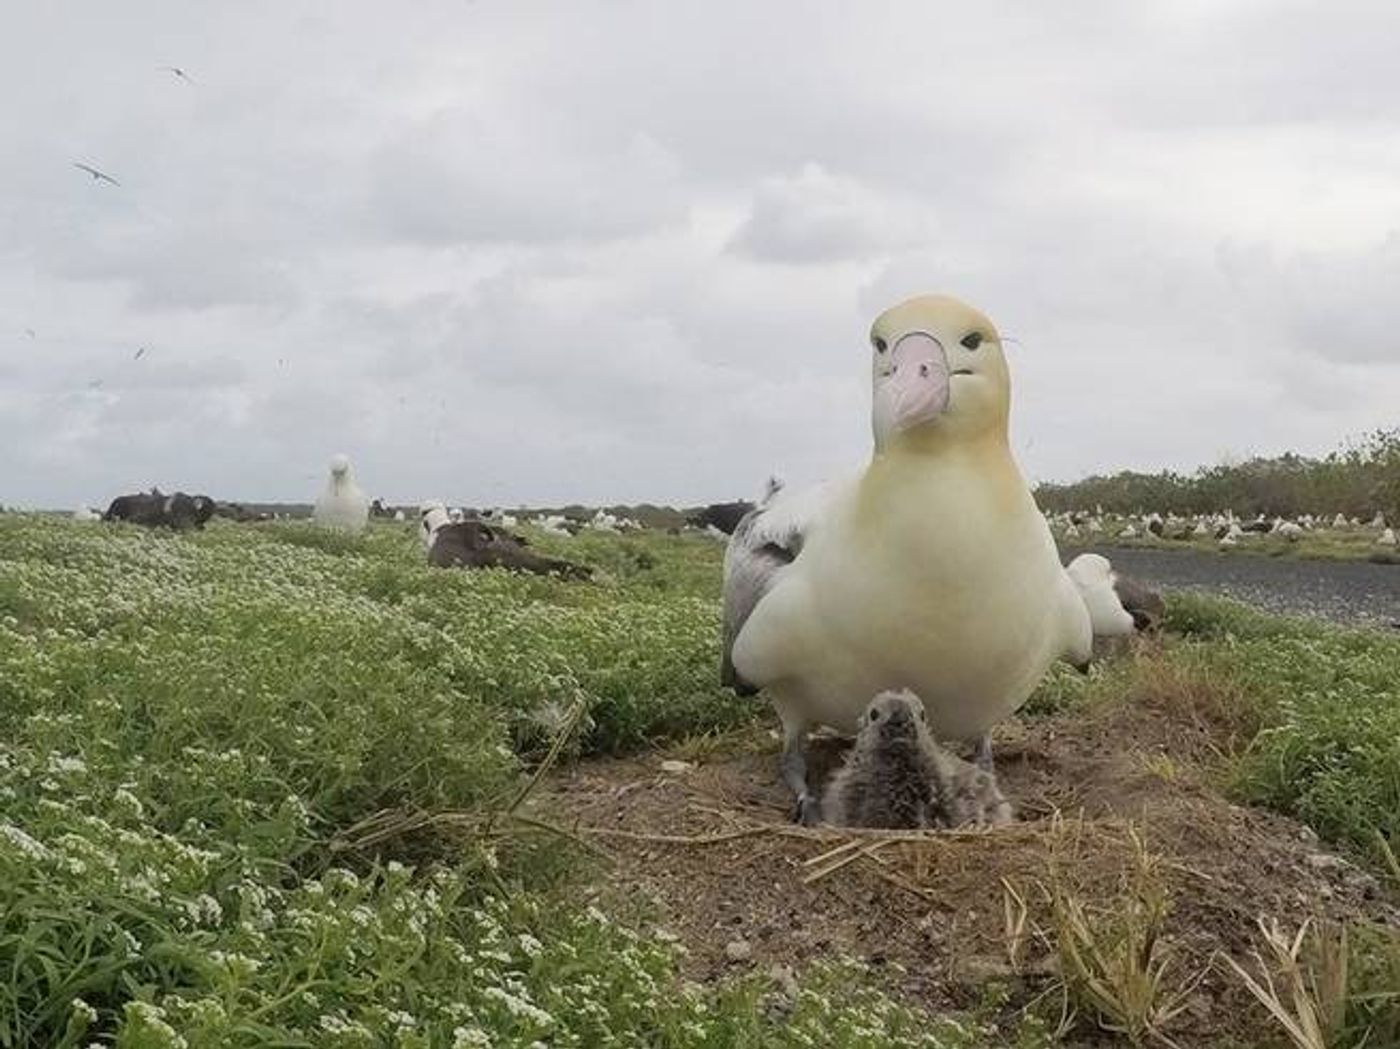 The short-tailed albatross and her unlikely hatchling.